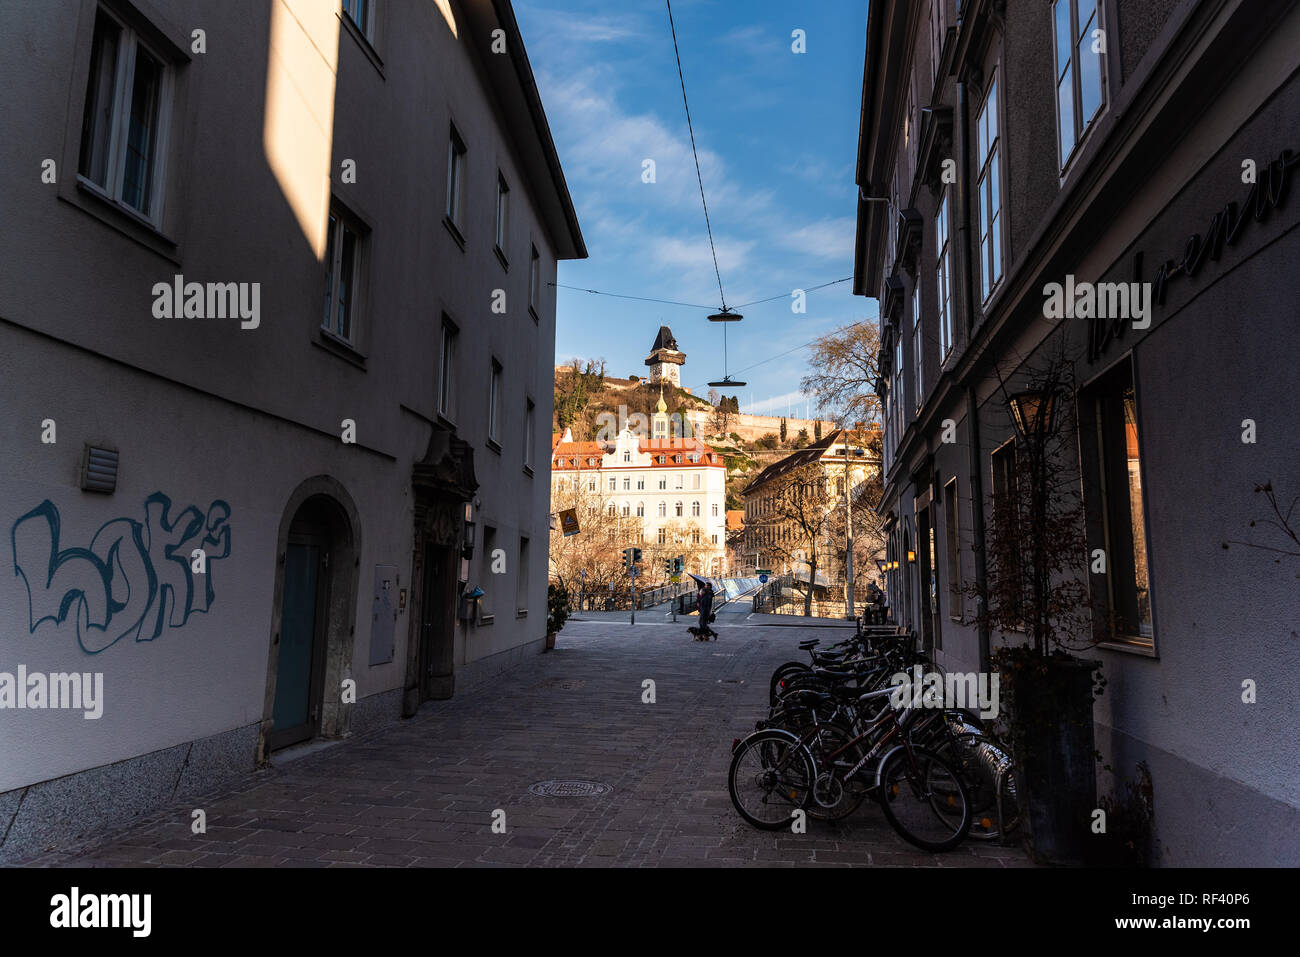 Graz, Styria / Austria - 20.01.2019: View at street leading to clock tower, people walking by in winter sun Travel destination Stock Photo